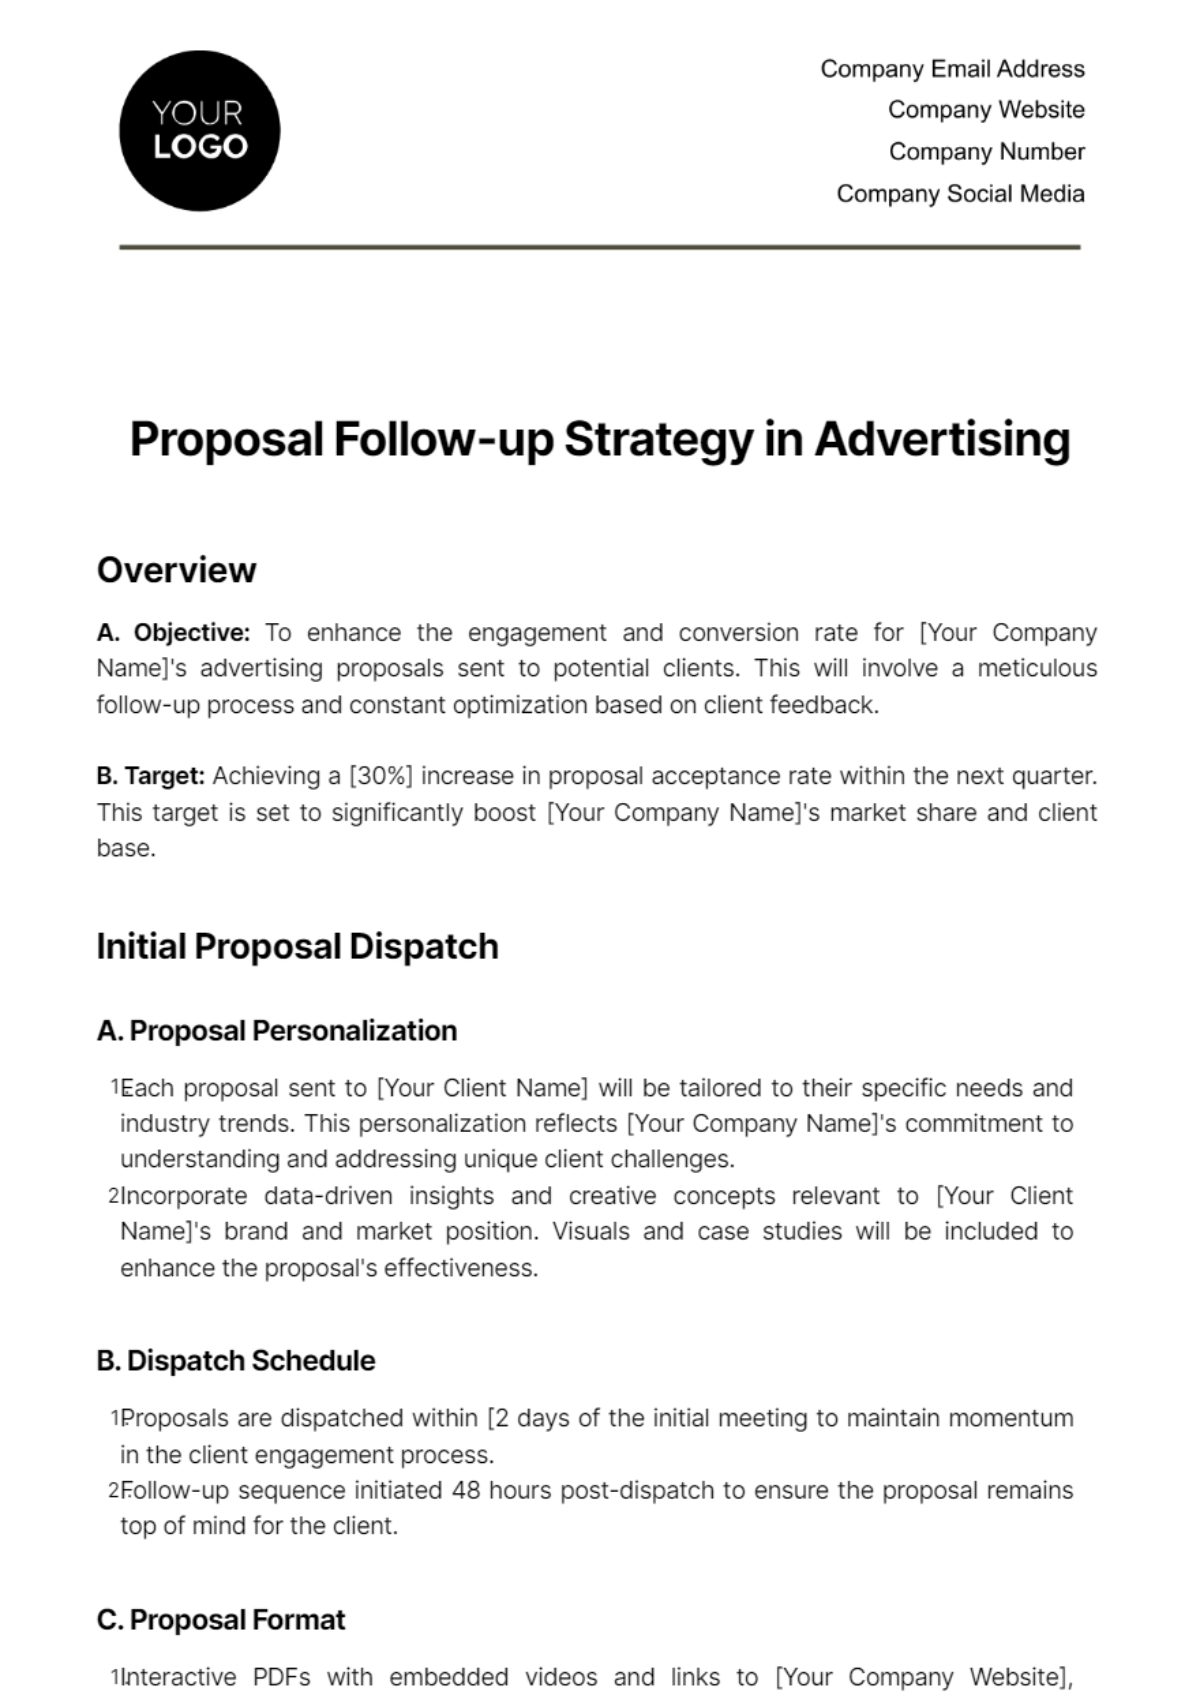 Free Proposal Follow-Up Strategy in Advertising Template